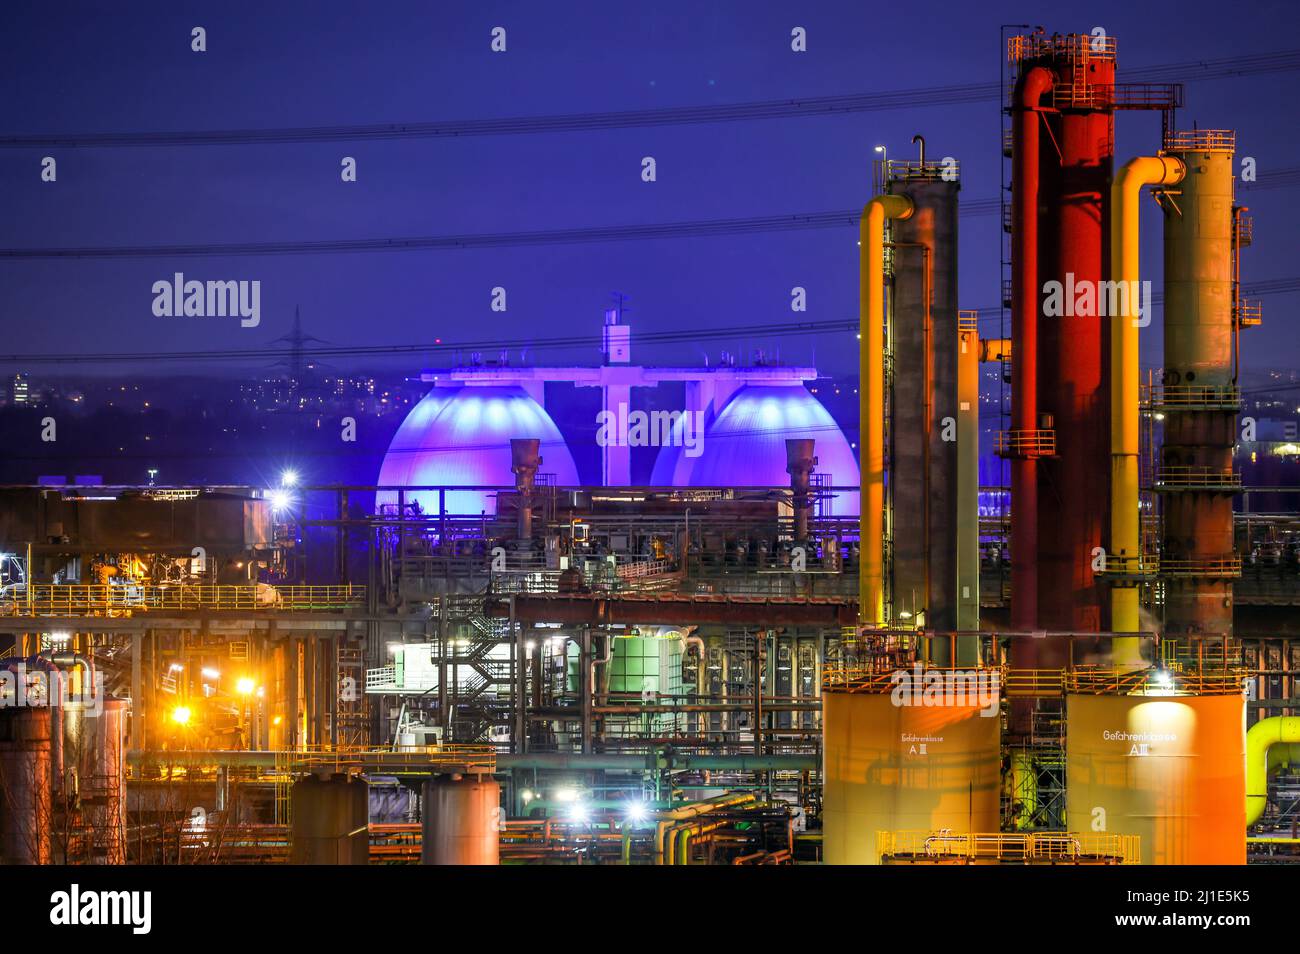 20.01.2022, Germany, North Rhine-Westphalia, Bottrop - The Prosper coking plant is one of the three operating coking plants in the Ruhr area. The Pros Stock Photo